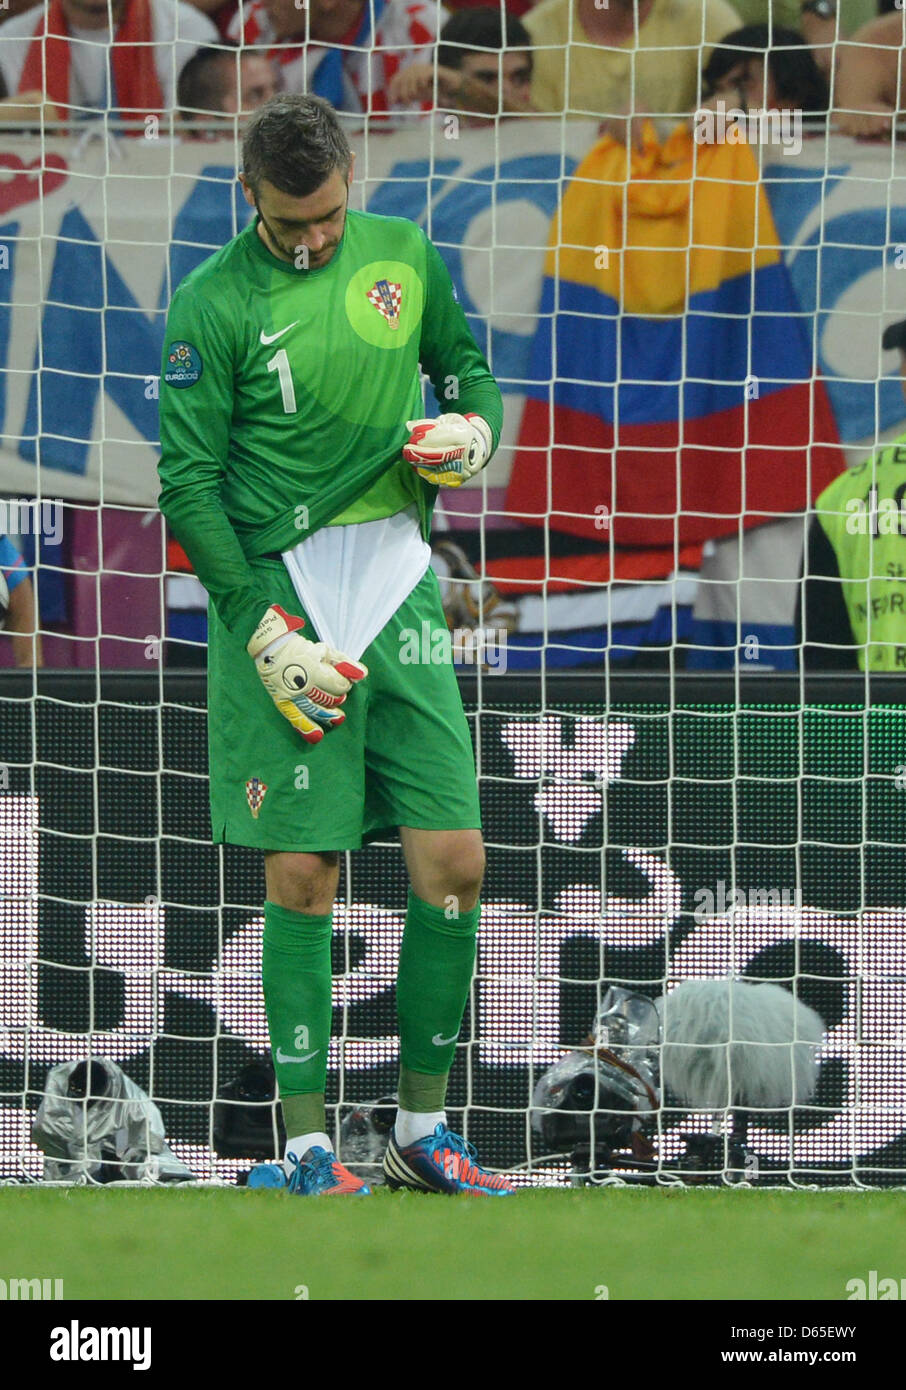 Croatia's  goalkeeper Stipe Pletikosa reacts during the UEFA EURO 2012 group C soccer match Croatia vs Spain at Arena Gdansk in Gdansk, Poland, 18 June 2012. Photo: Marcus Brandt dpa (Please refer to chapters 7 and 8 of http://dpaq.de/Ziovh for UEFA Euro 2012 Terms & Conditions)  +++(c) dpa - Bildfunk+++ Stock Photo